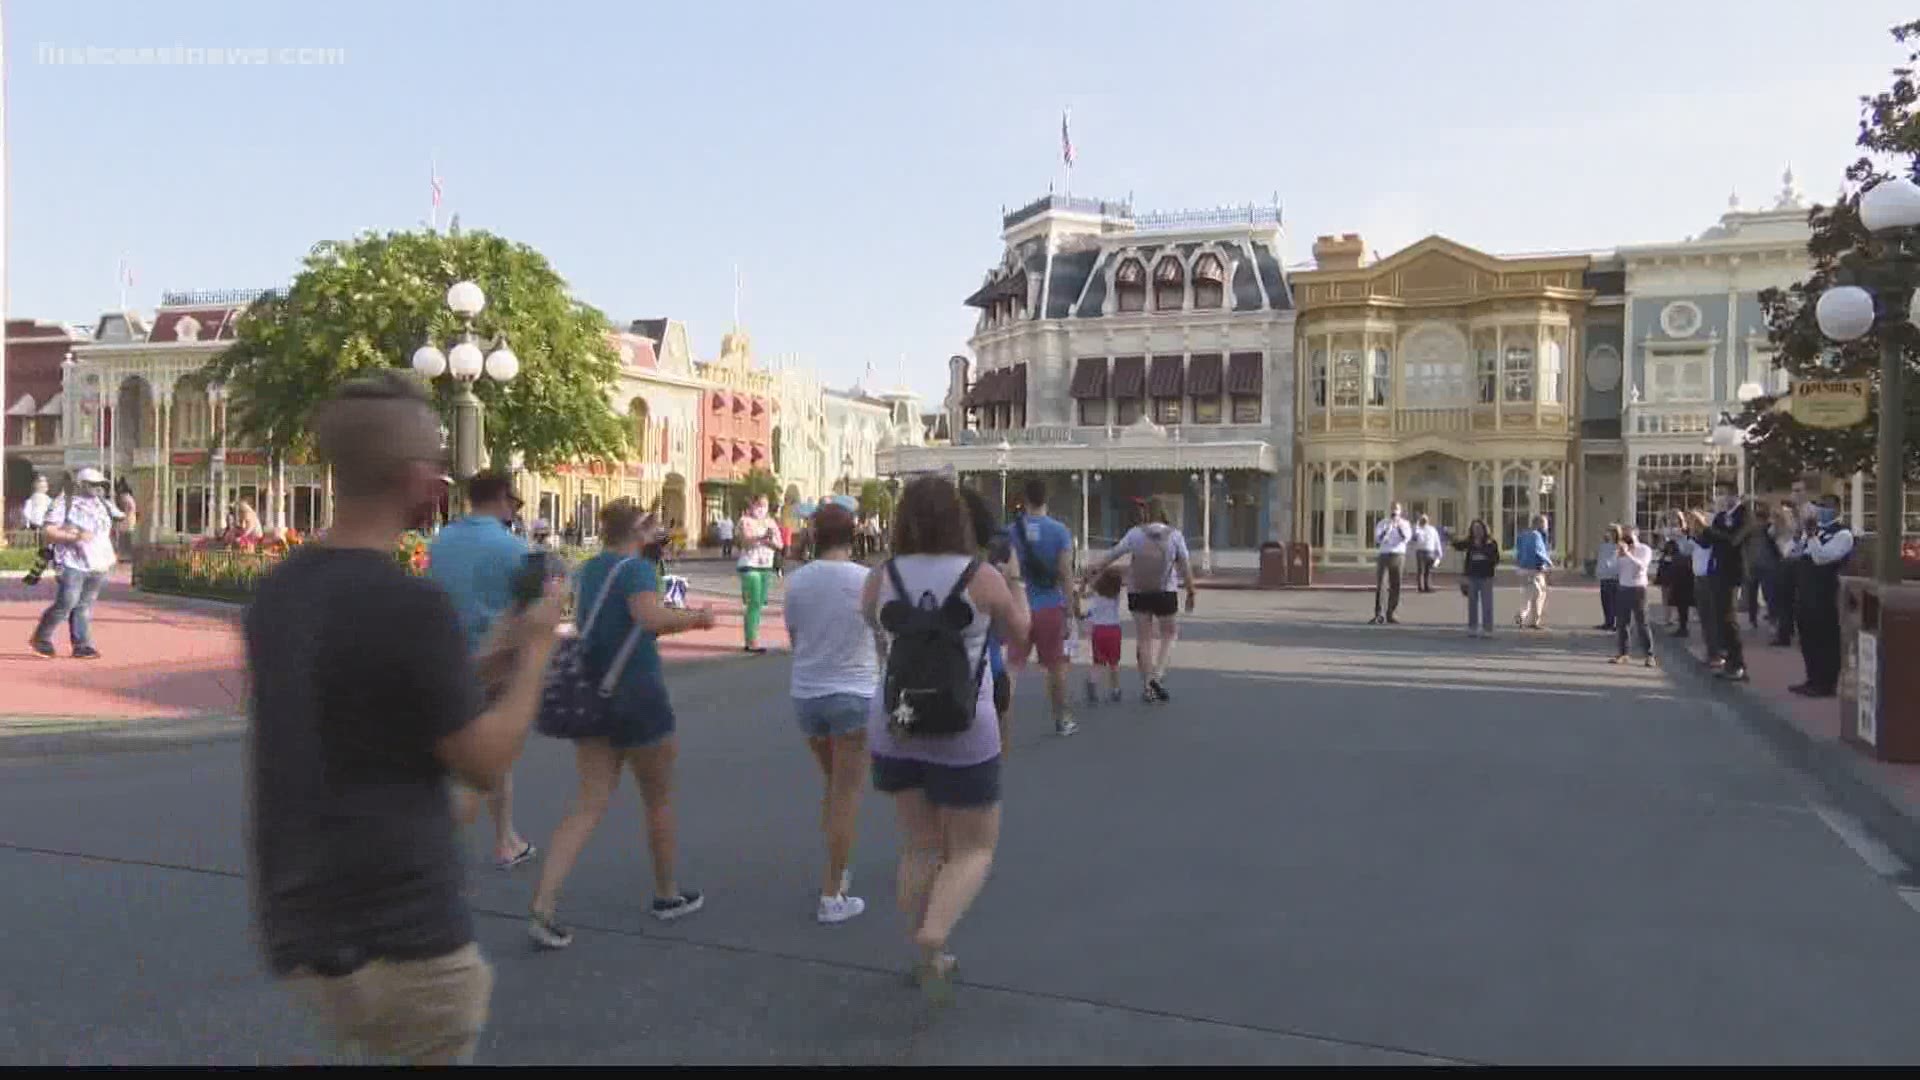 The new policy hopes to limit movement around the park without a mask.